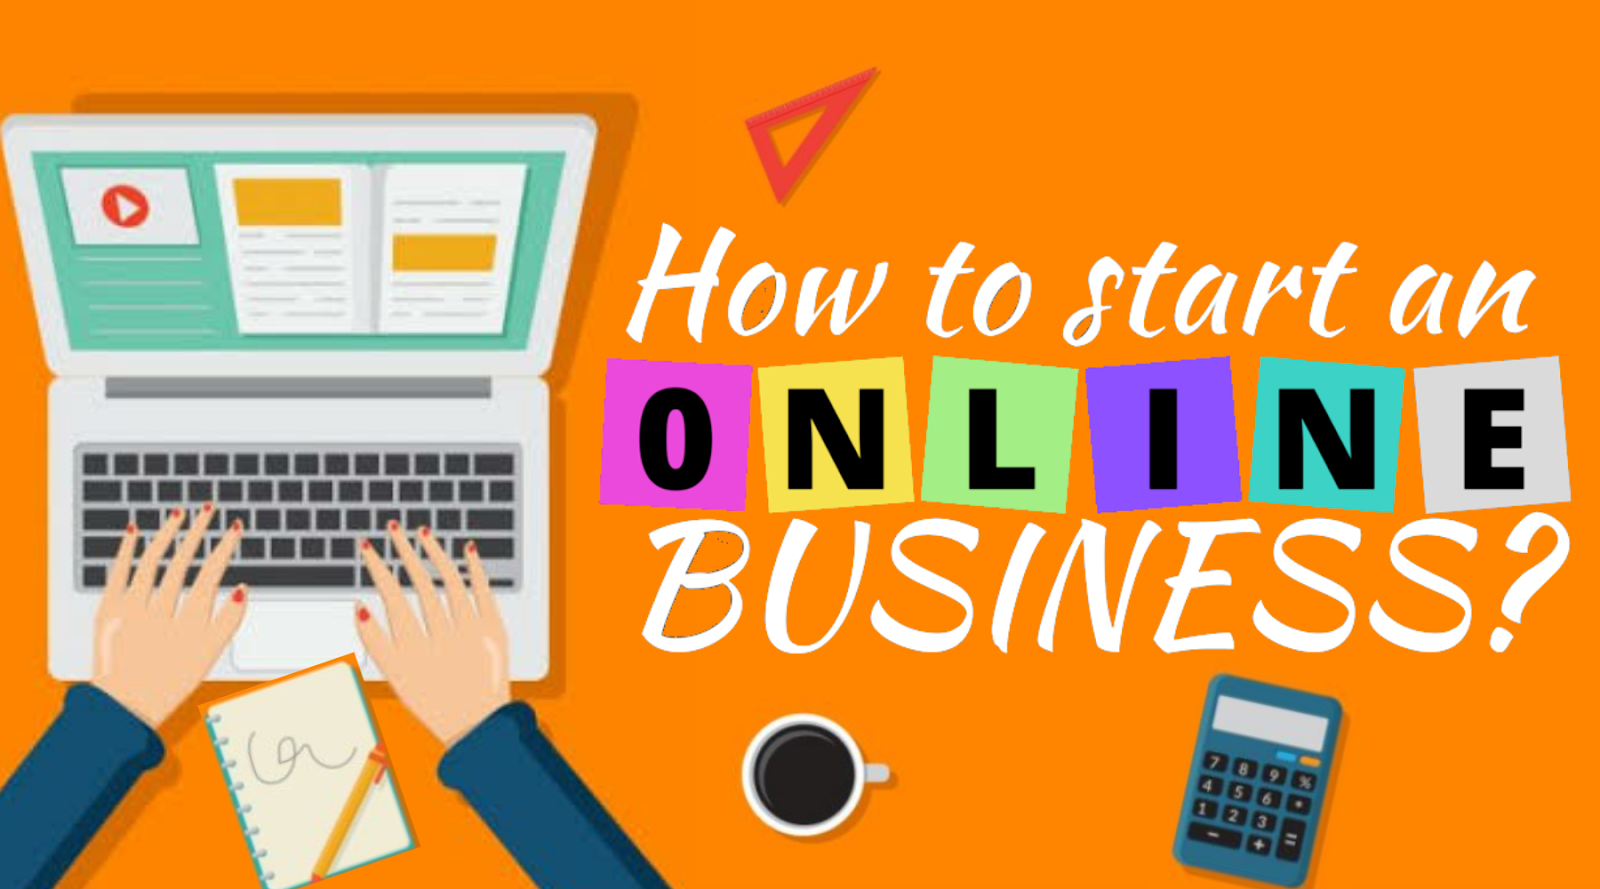 Online Business Start-up! 6 Simple Steps to Go Online